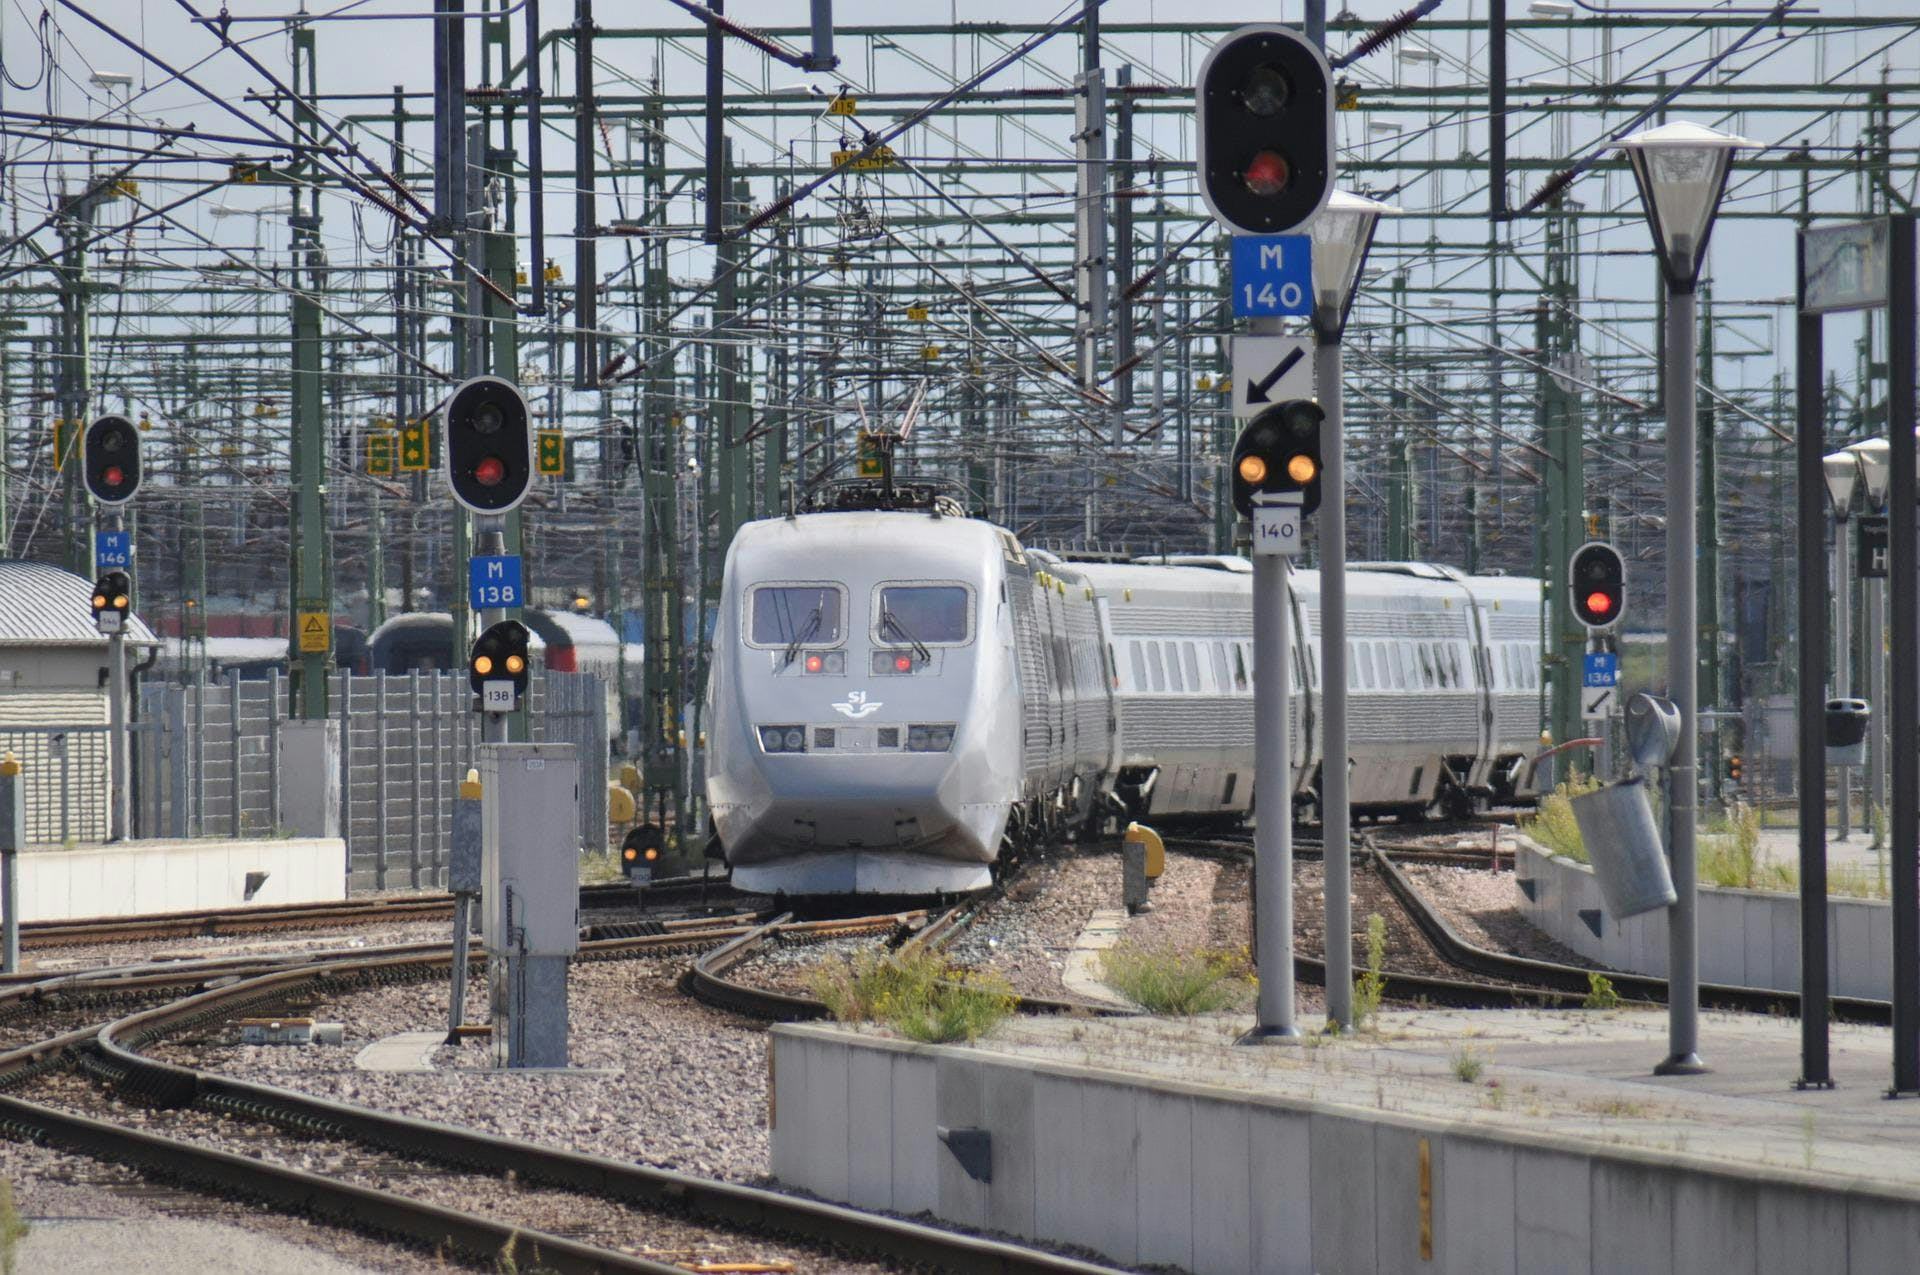 A silver SJ X2000 train departing the station